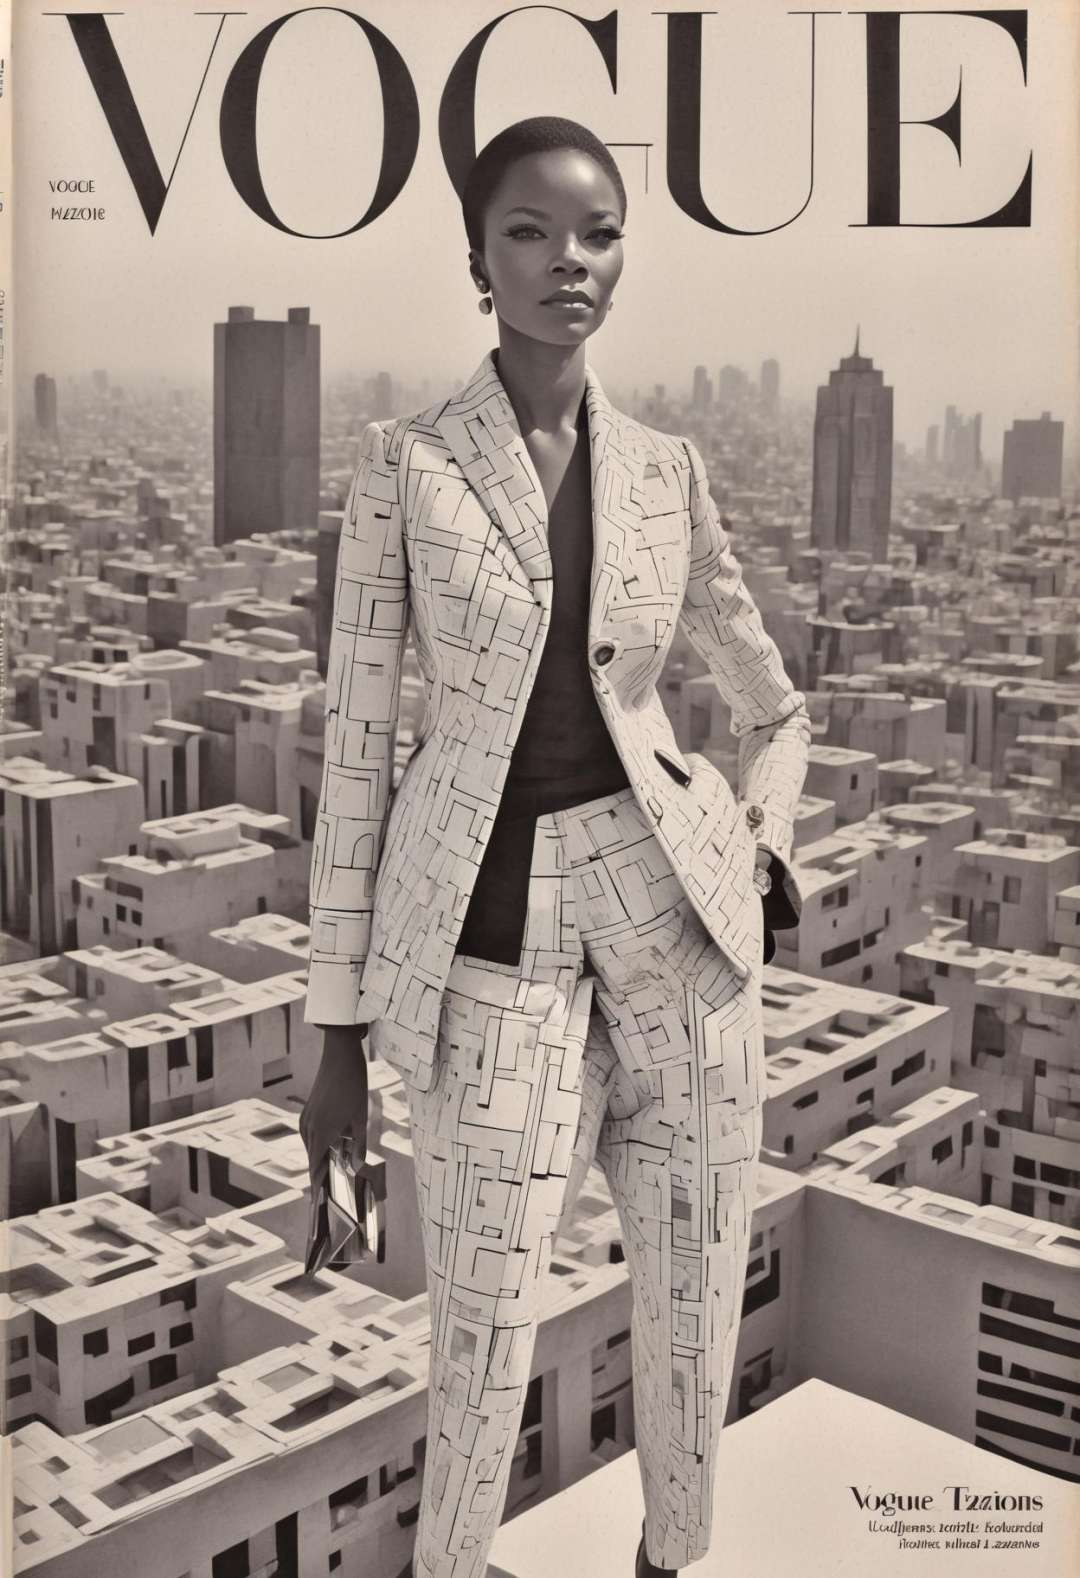 She african geometric patterns, monochrome elegance, sharp contrasts, tailored suit, modern sophistication, Architectural Digest Fashion Feature, urban skyline backdrop.,highly intricate,(VOGUE Cover Magazine:1.15),1968, 60s, black letters, hyper detailed, photorealistic,,